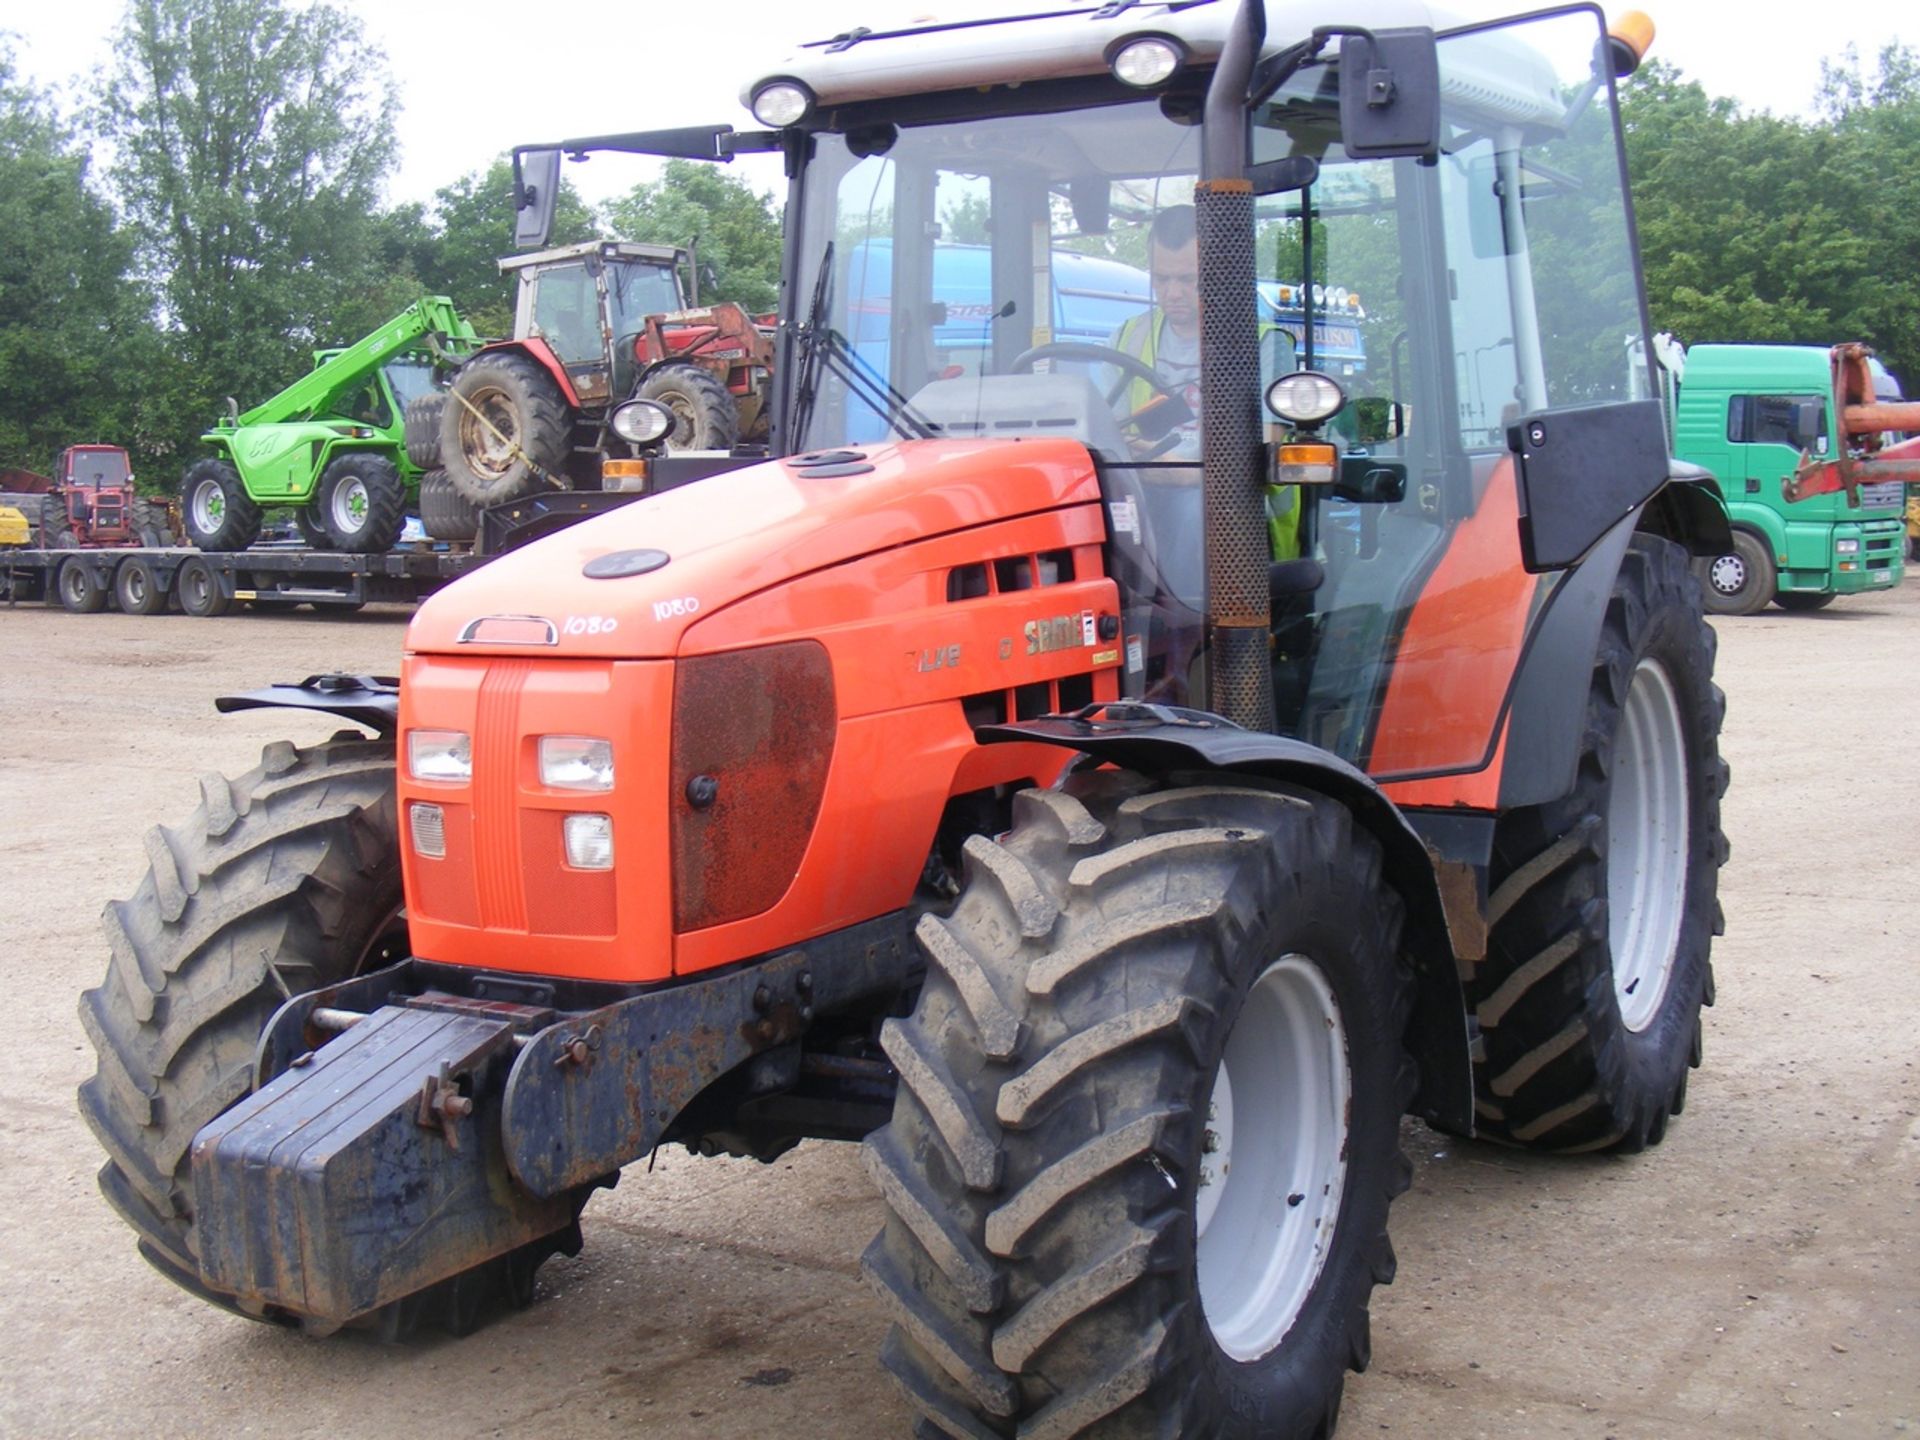 2007 Same Silver 110 Power Shuttle Tractor with Full Set of Weights & Oversized Tyres. V5 will be